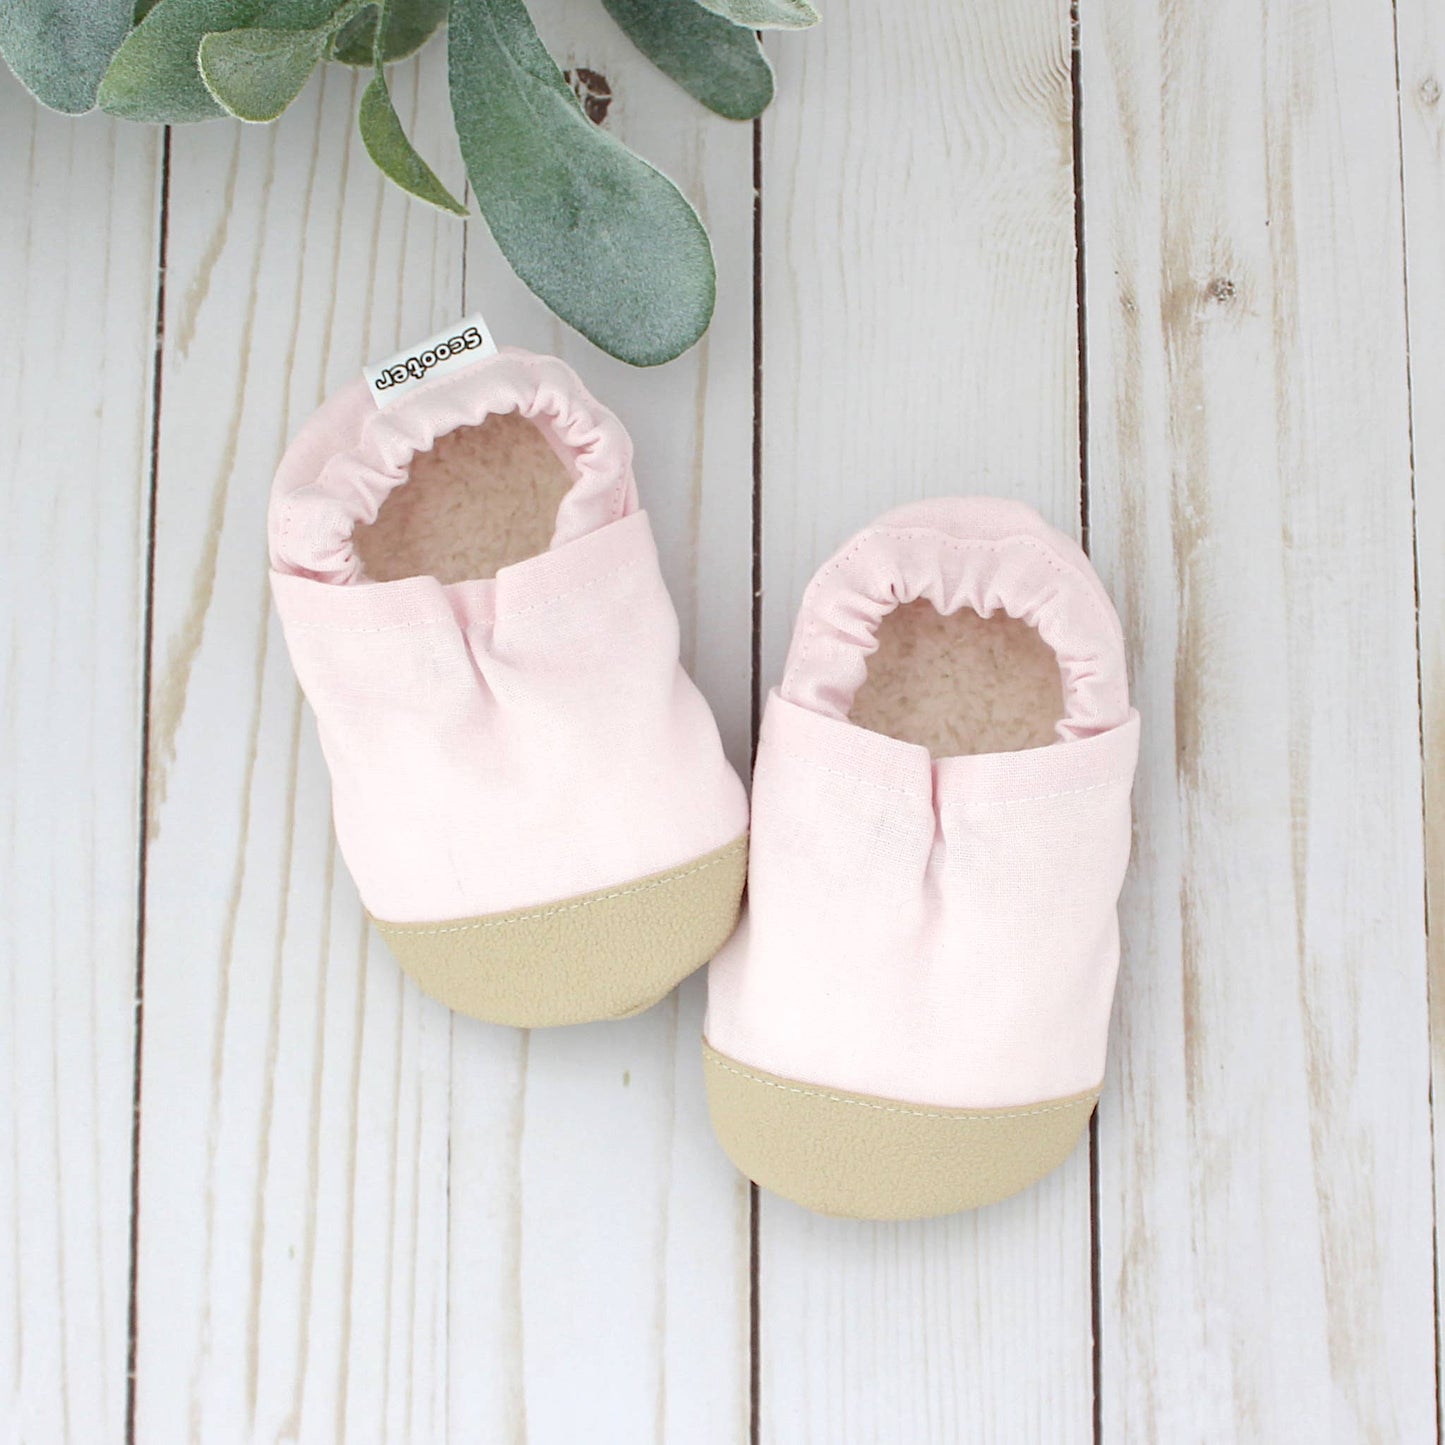 Scooter Booties - Powder Pink Linen Baby Shoes: 3 Toddler